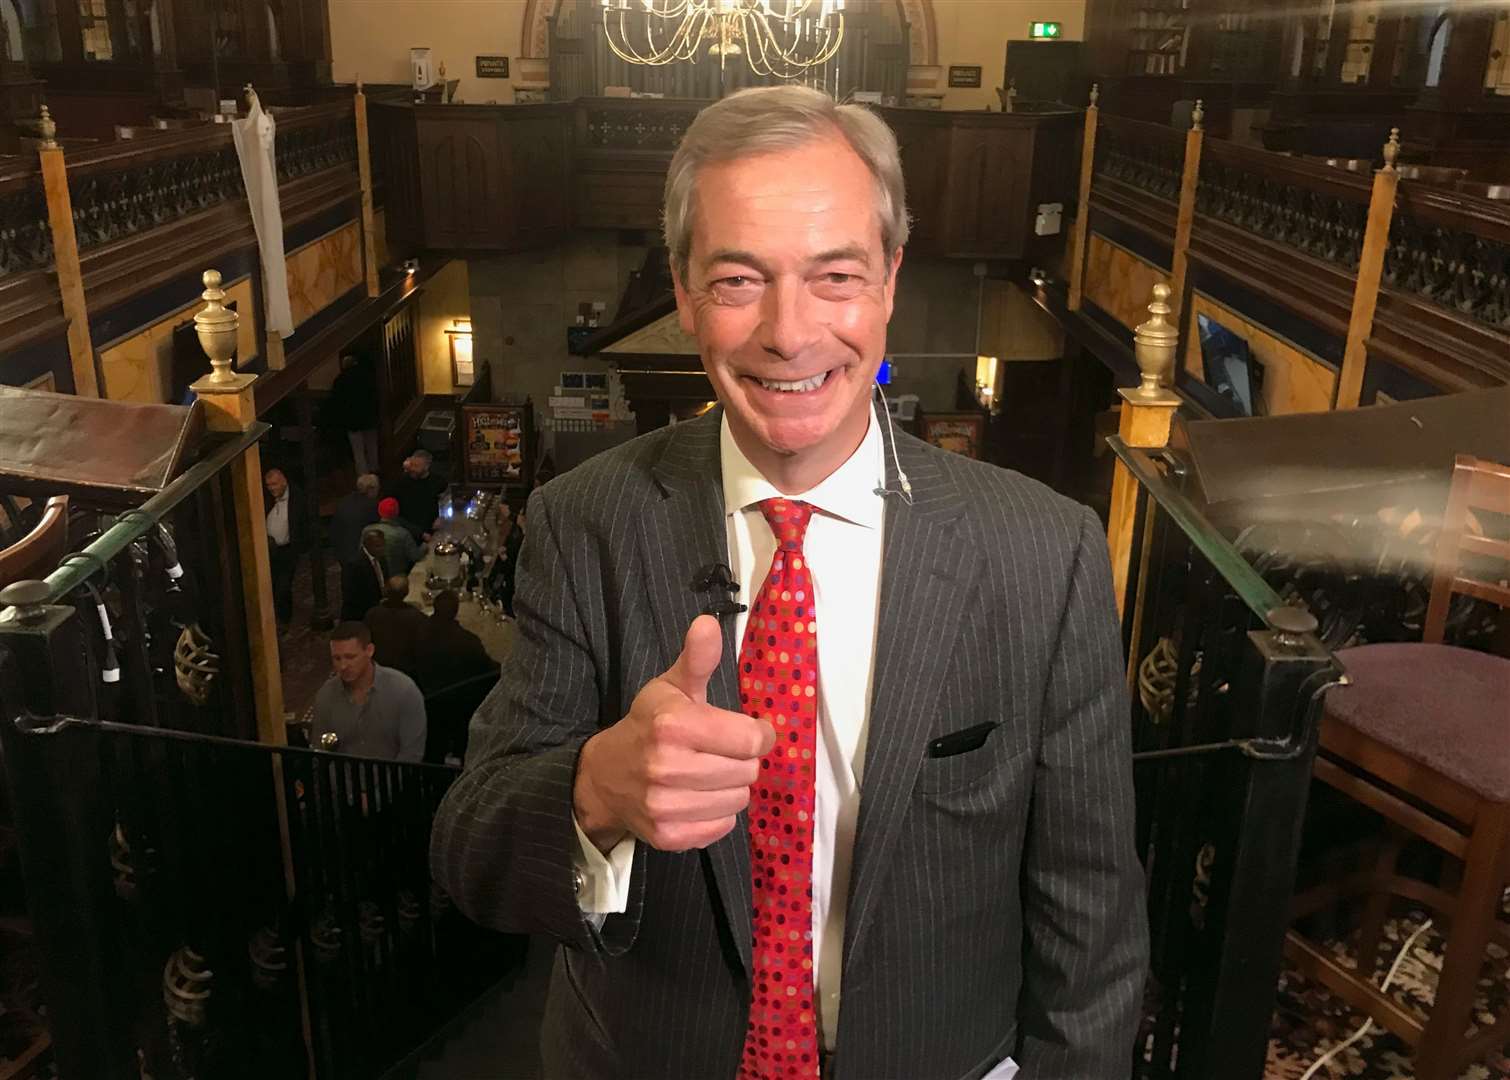 He's the ultimate Marmite politician...but Nigel Farage's influence has been significant